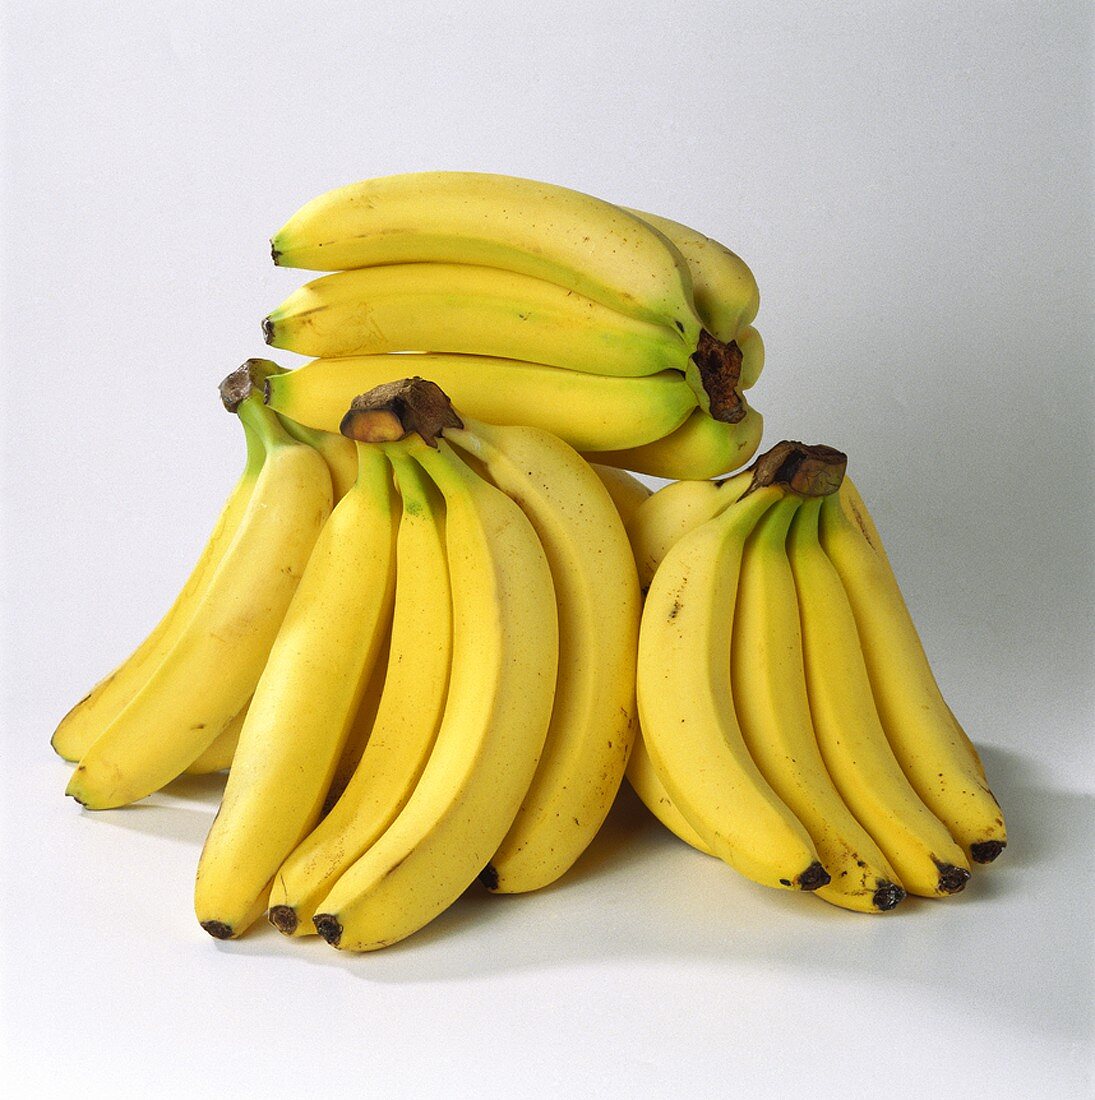 Bunches of bananas